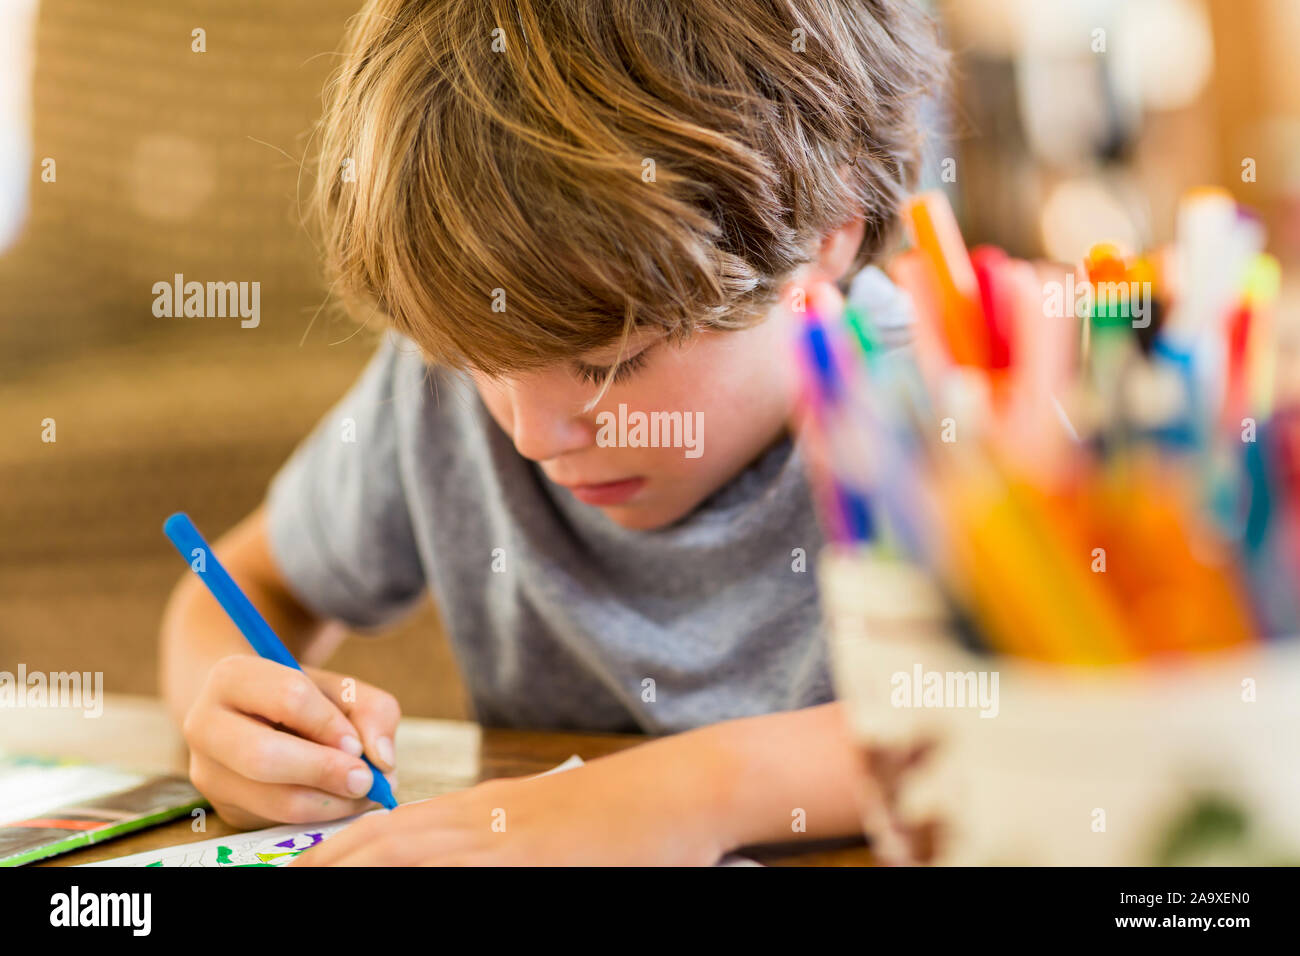 6 year old boy drawing amoung colorful pens Stock Photo